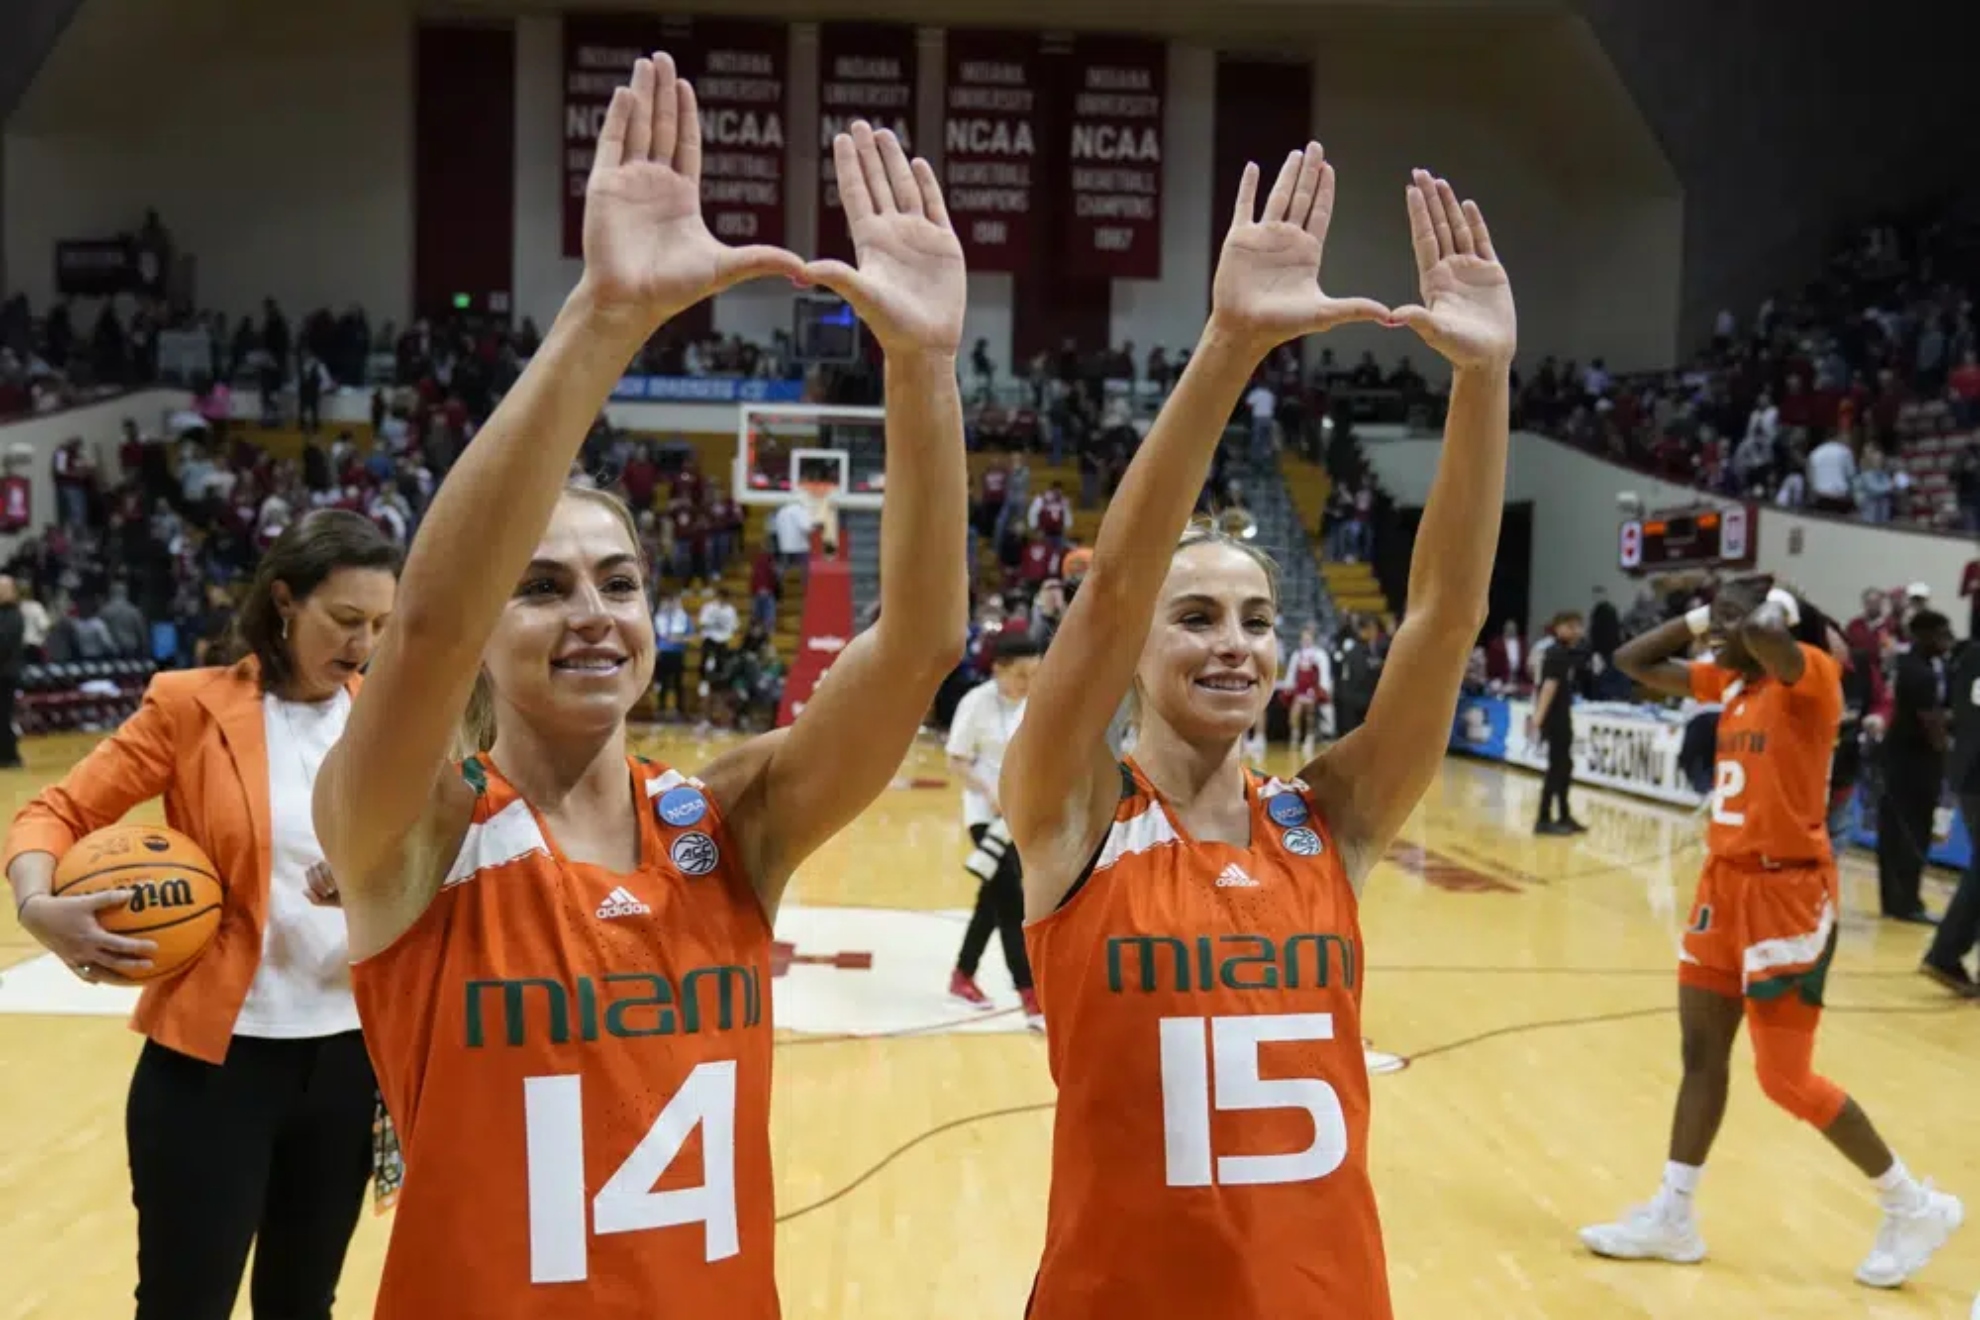 The Cavinder twins helped Miami reach the Elite Eight round in the NCAA Tournament.